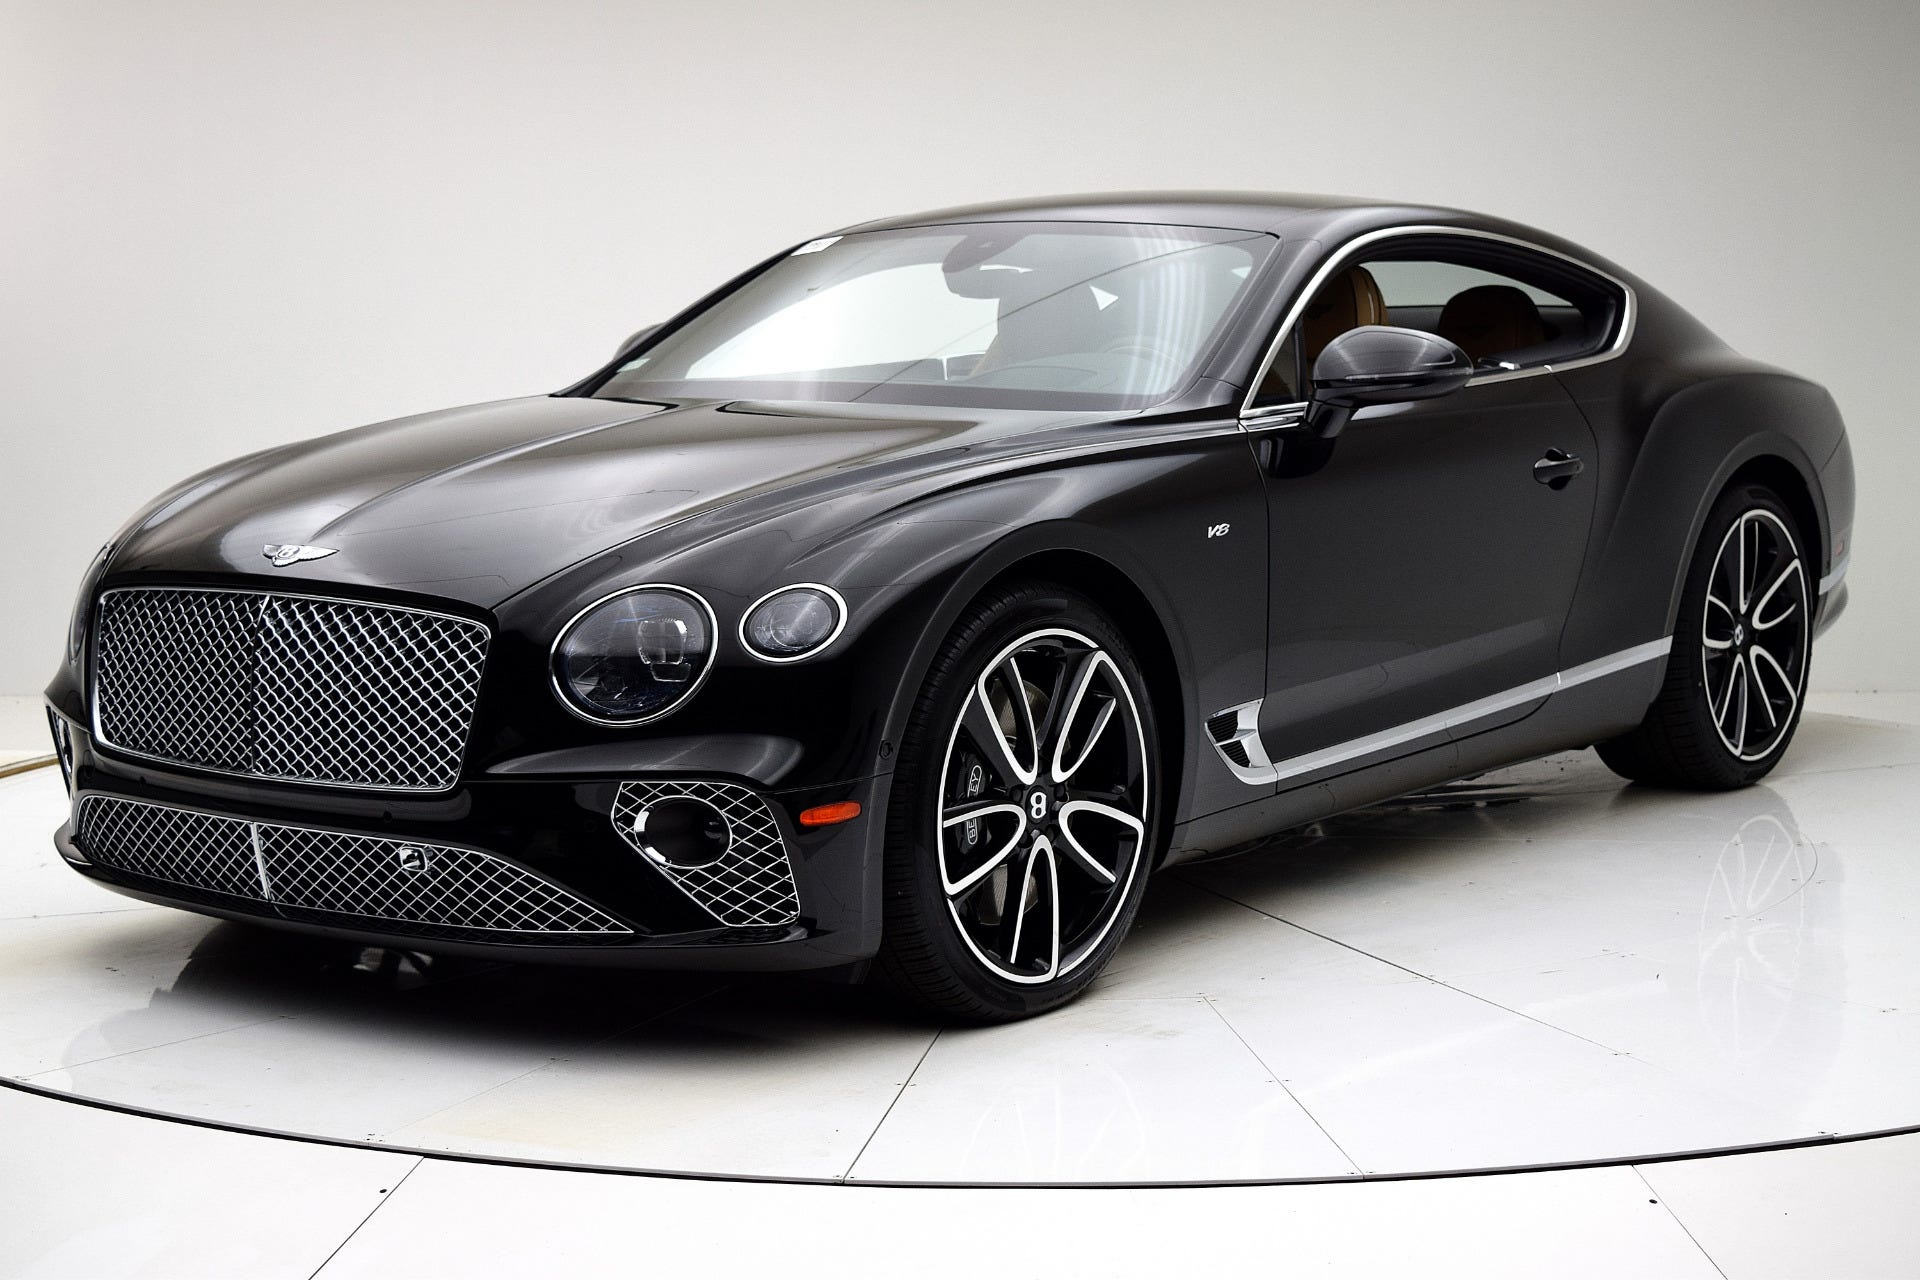 2020 Bentley Continental GT sport coupe